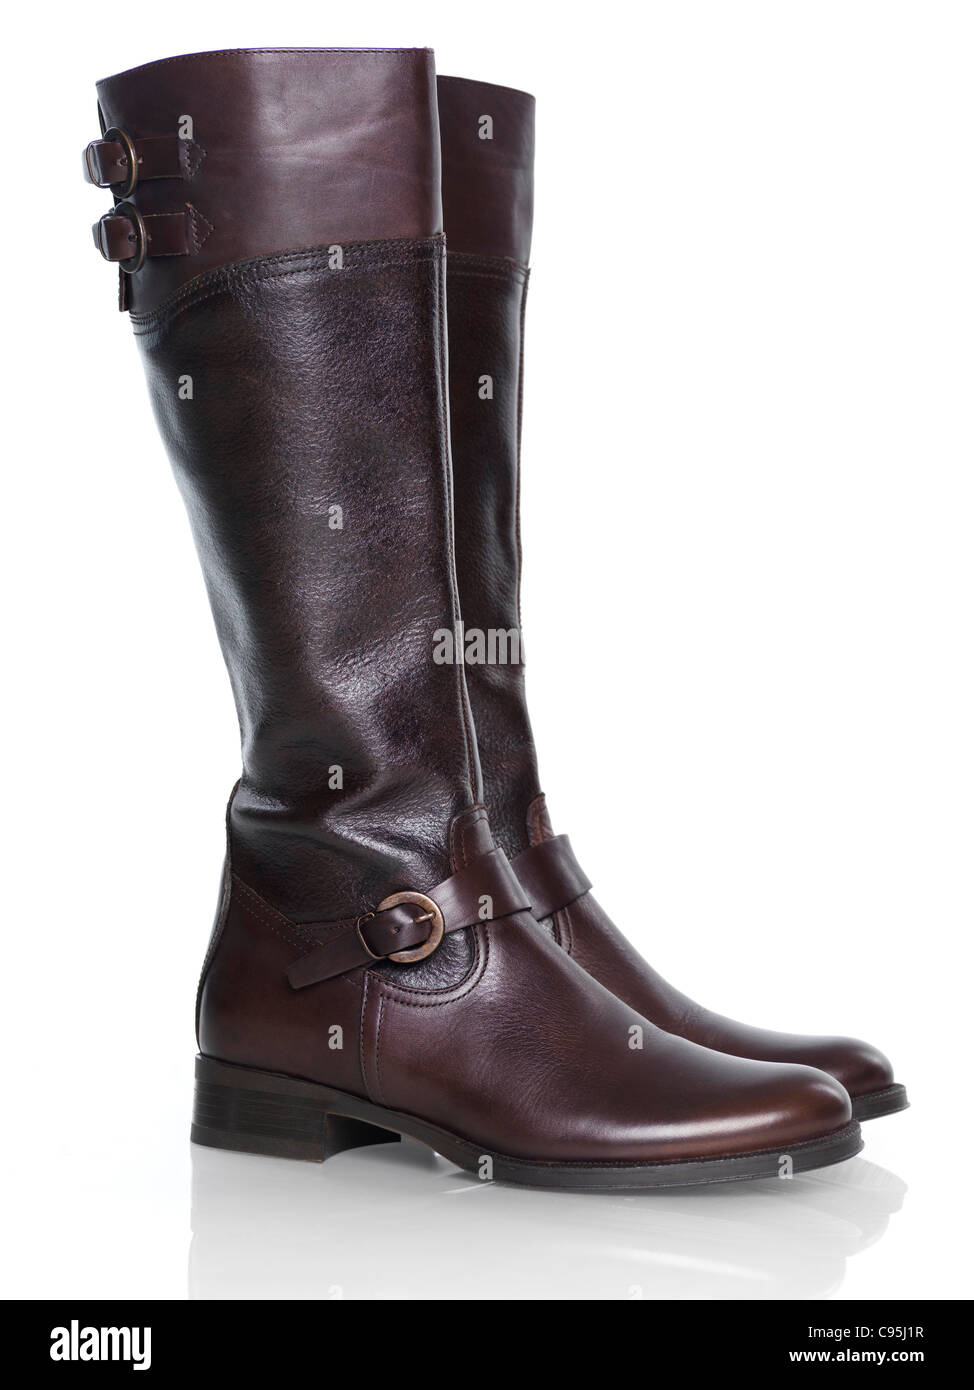 Knee-high brown leather fashion womens boots isolated on white background Stock Photo